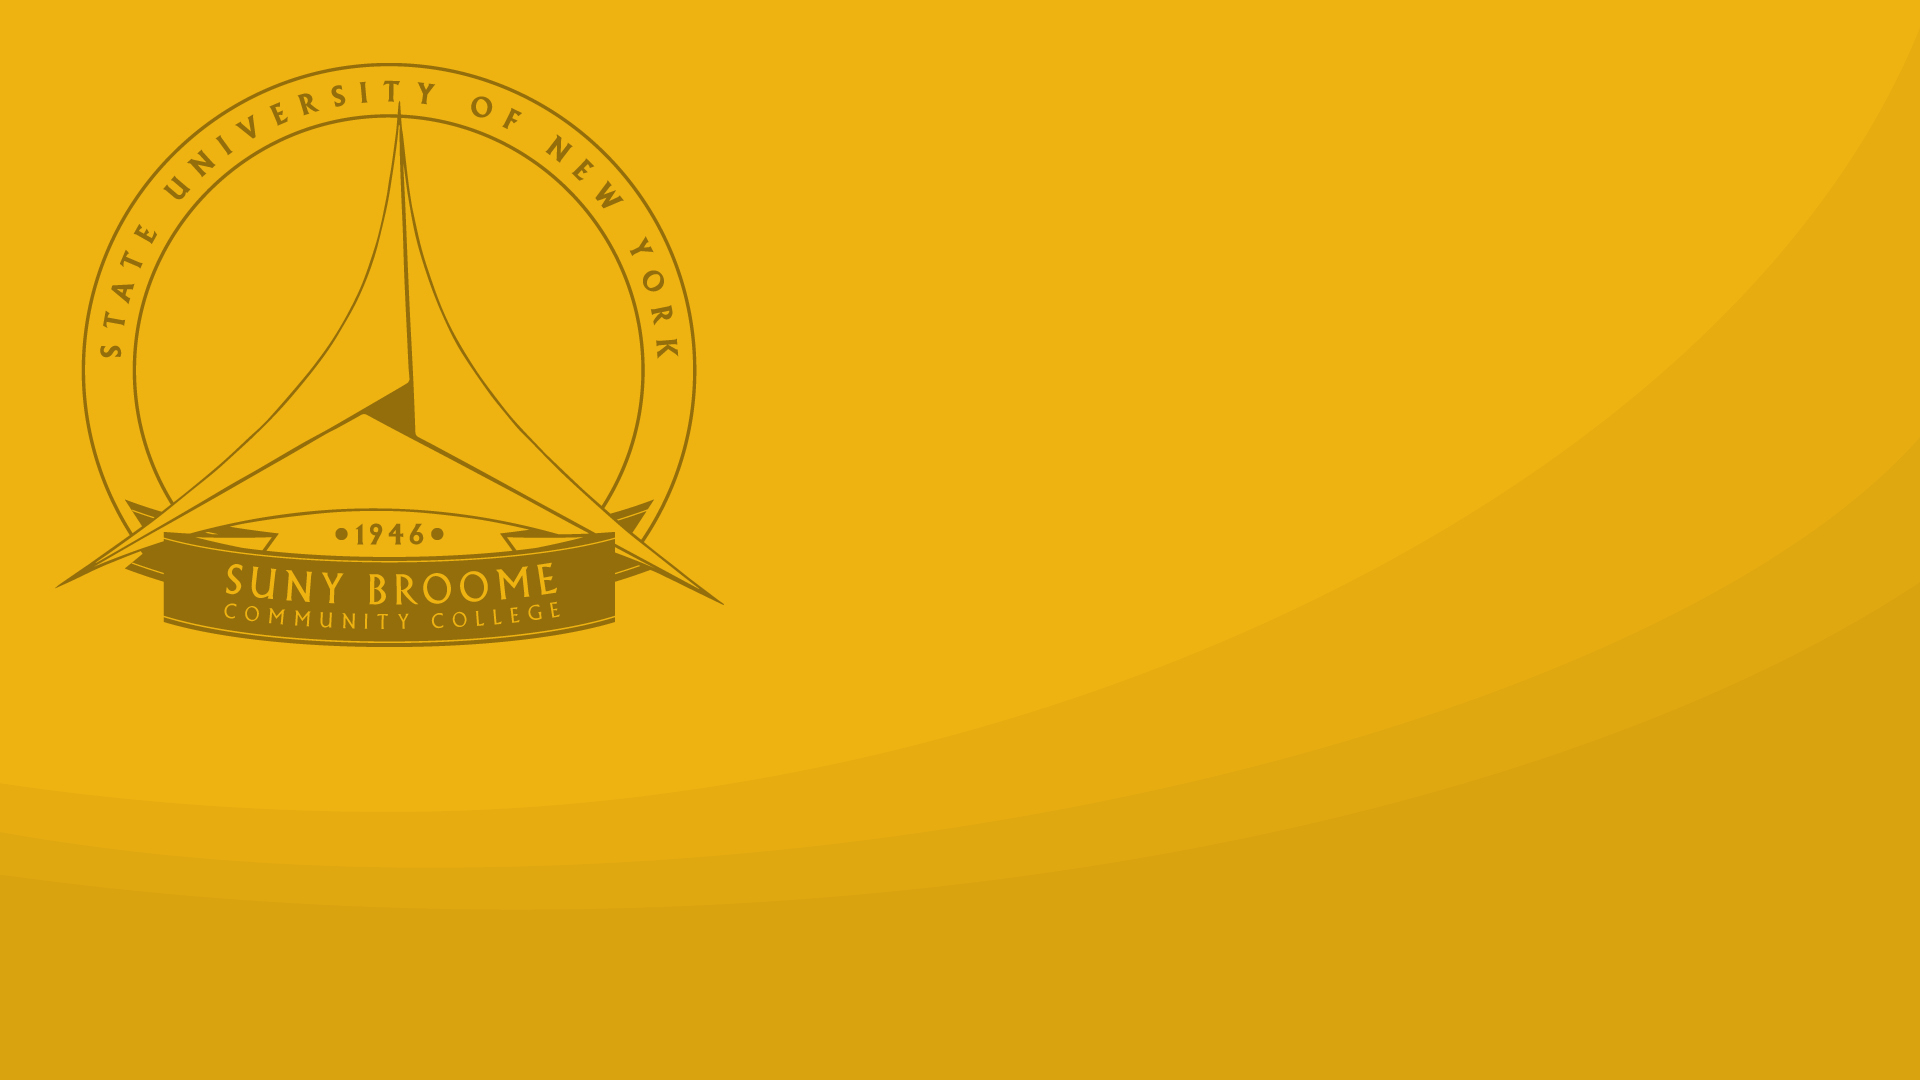 Download Zoom virtual background with SUNY Broome seal in black on a predominantly yellow background (jpg)